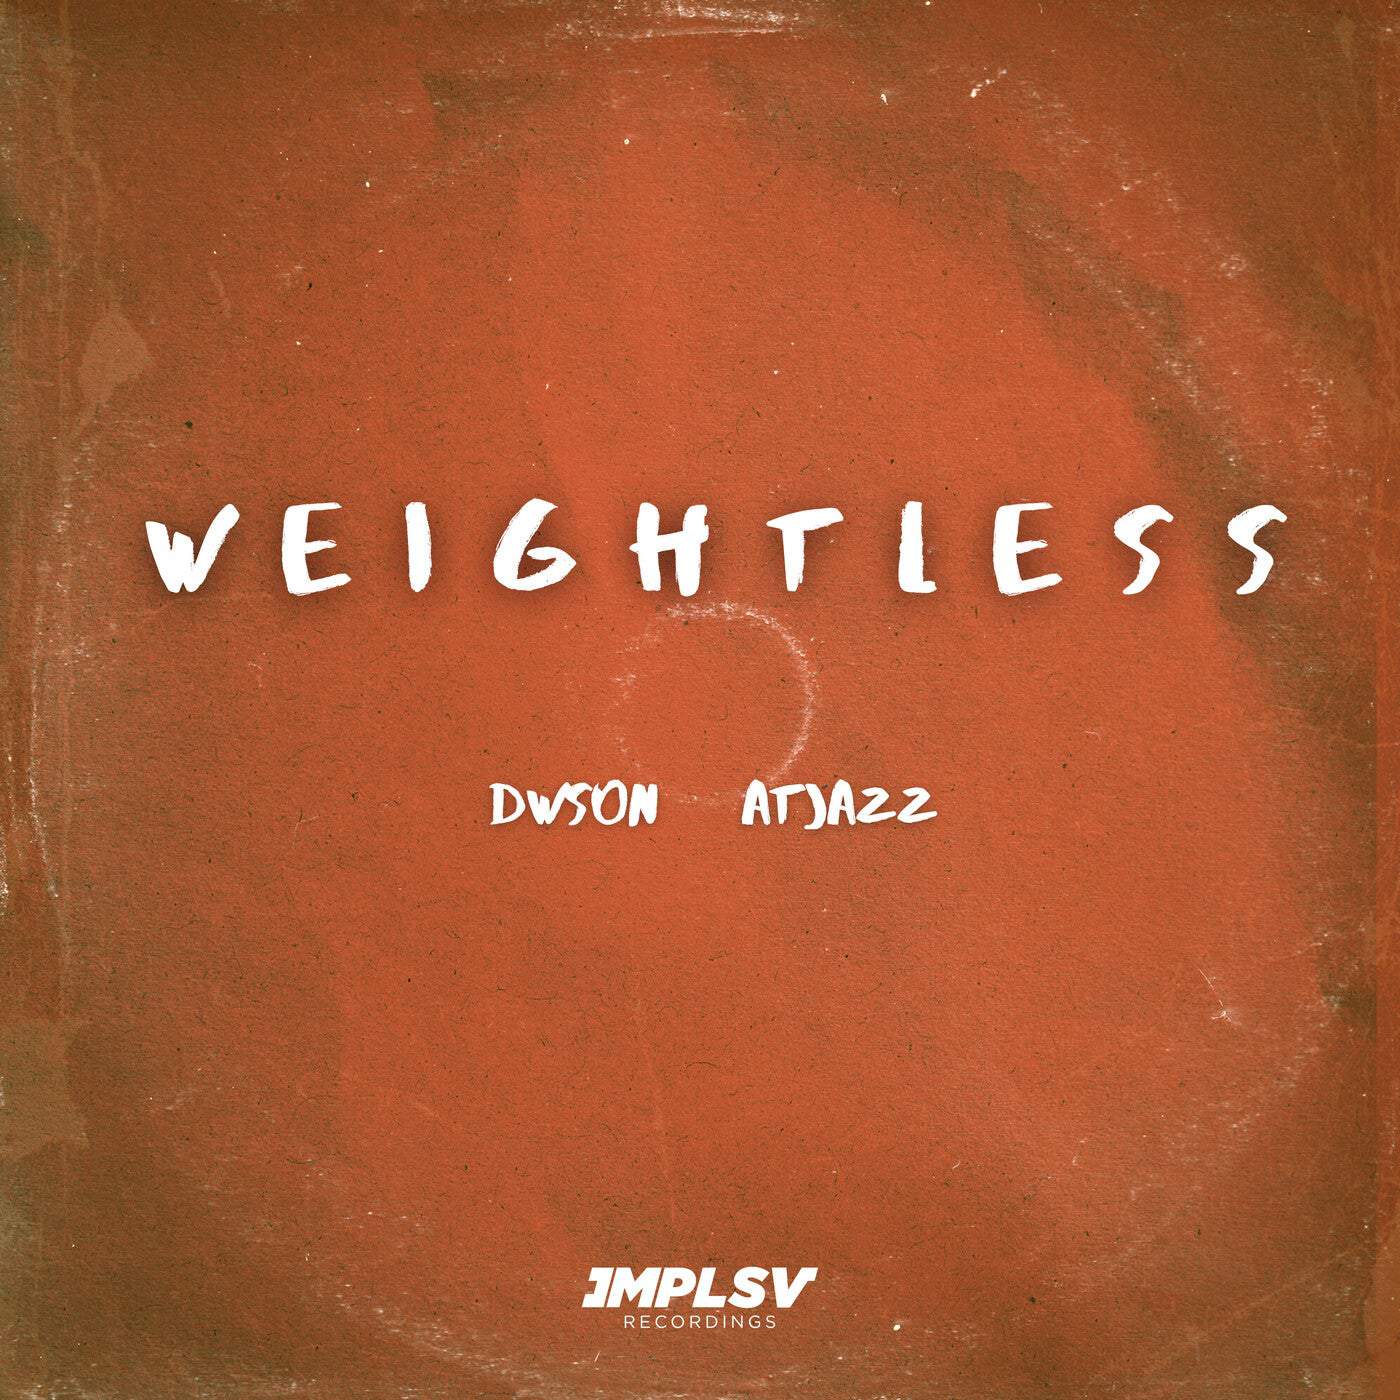 image cover: Atjazz, Dwson - Weightless / IMPLSV03S2